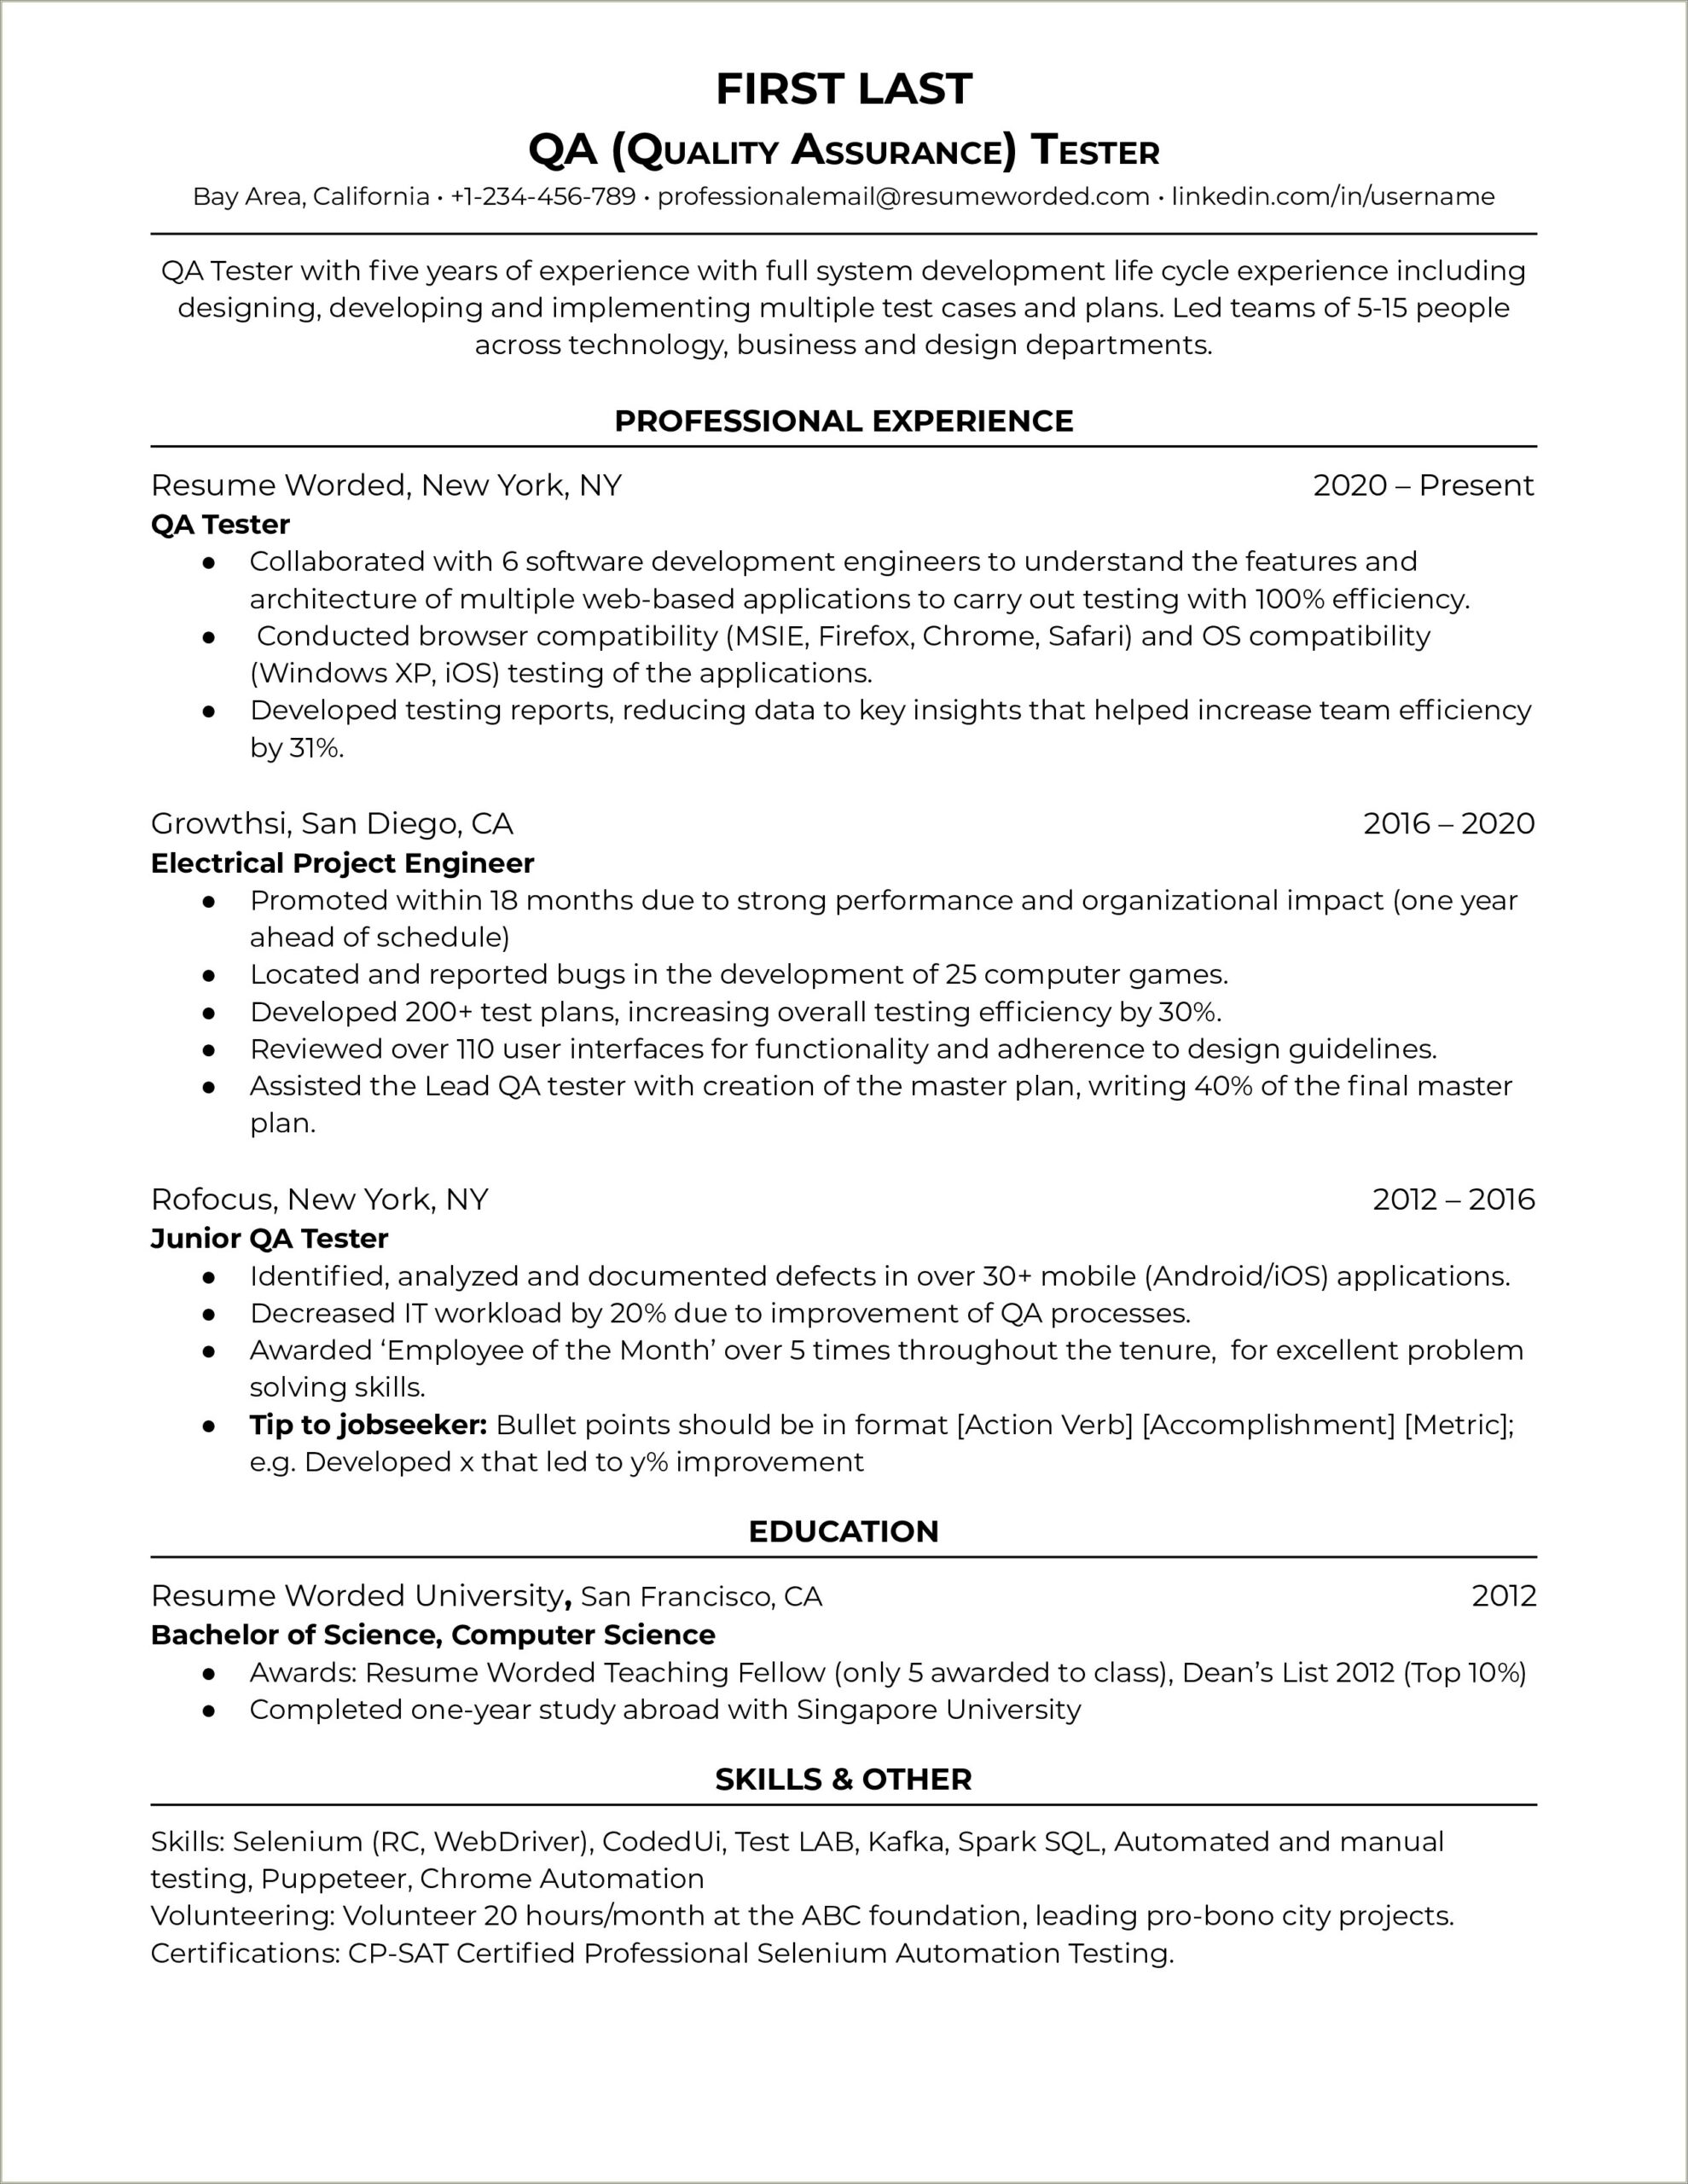 7 Years Experience In Testing Resumes